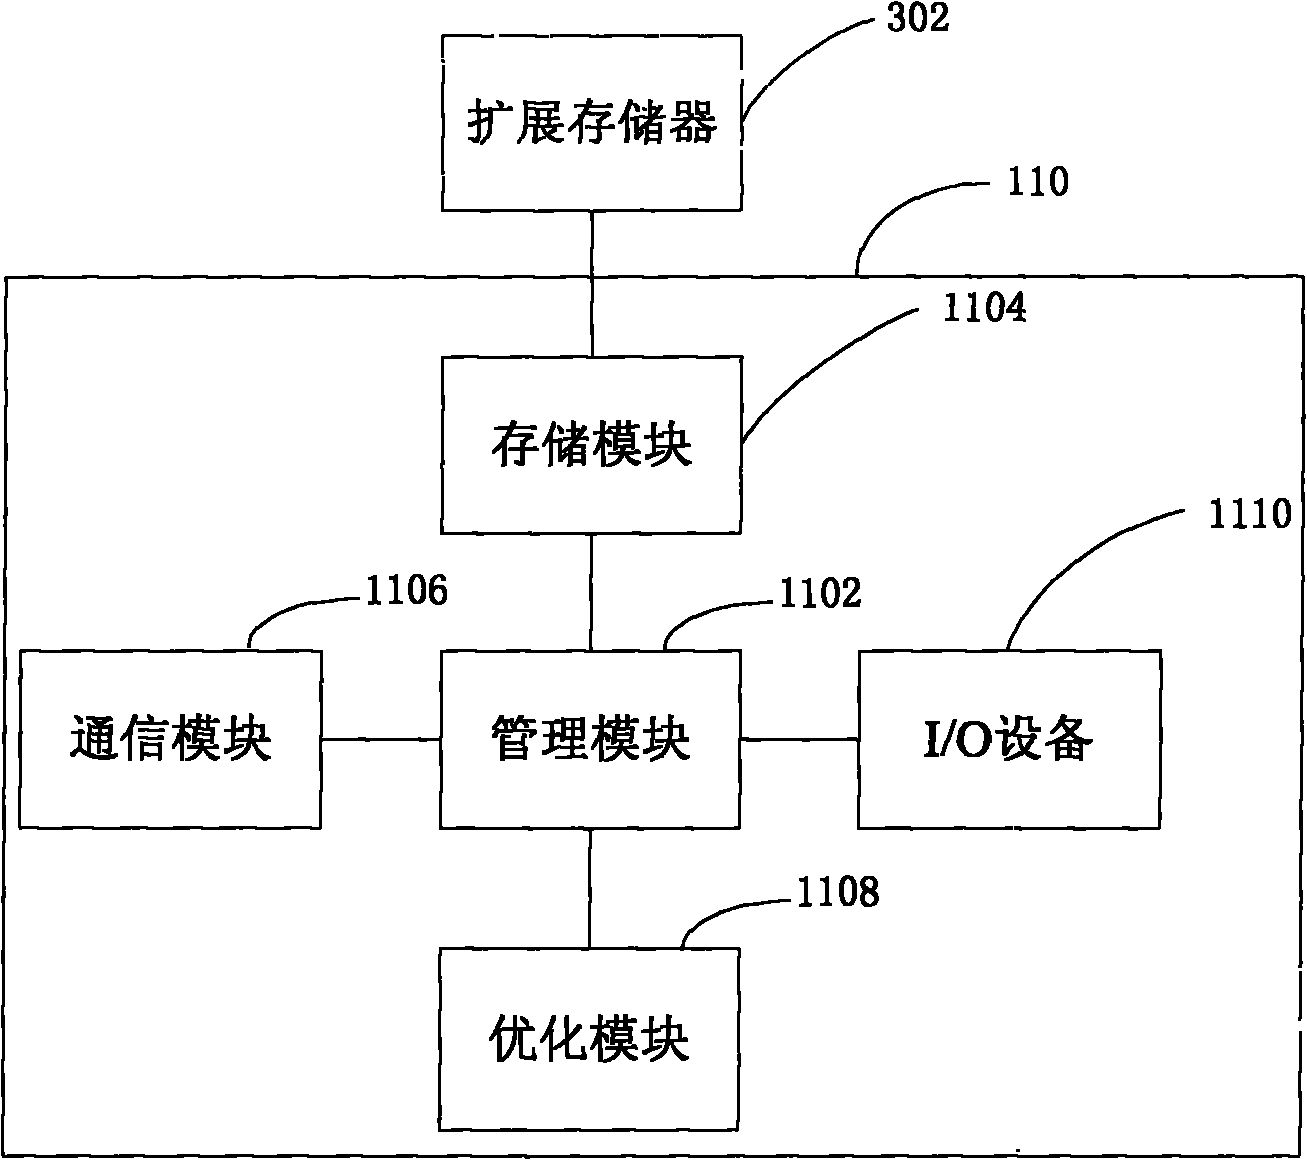 Power grid system and management method thereof